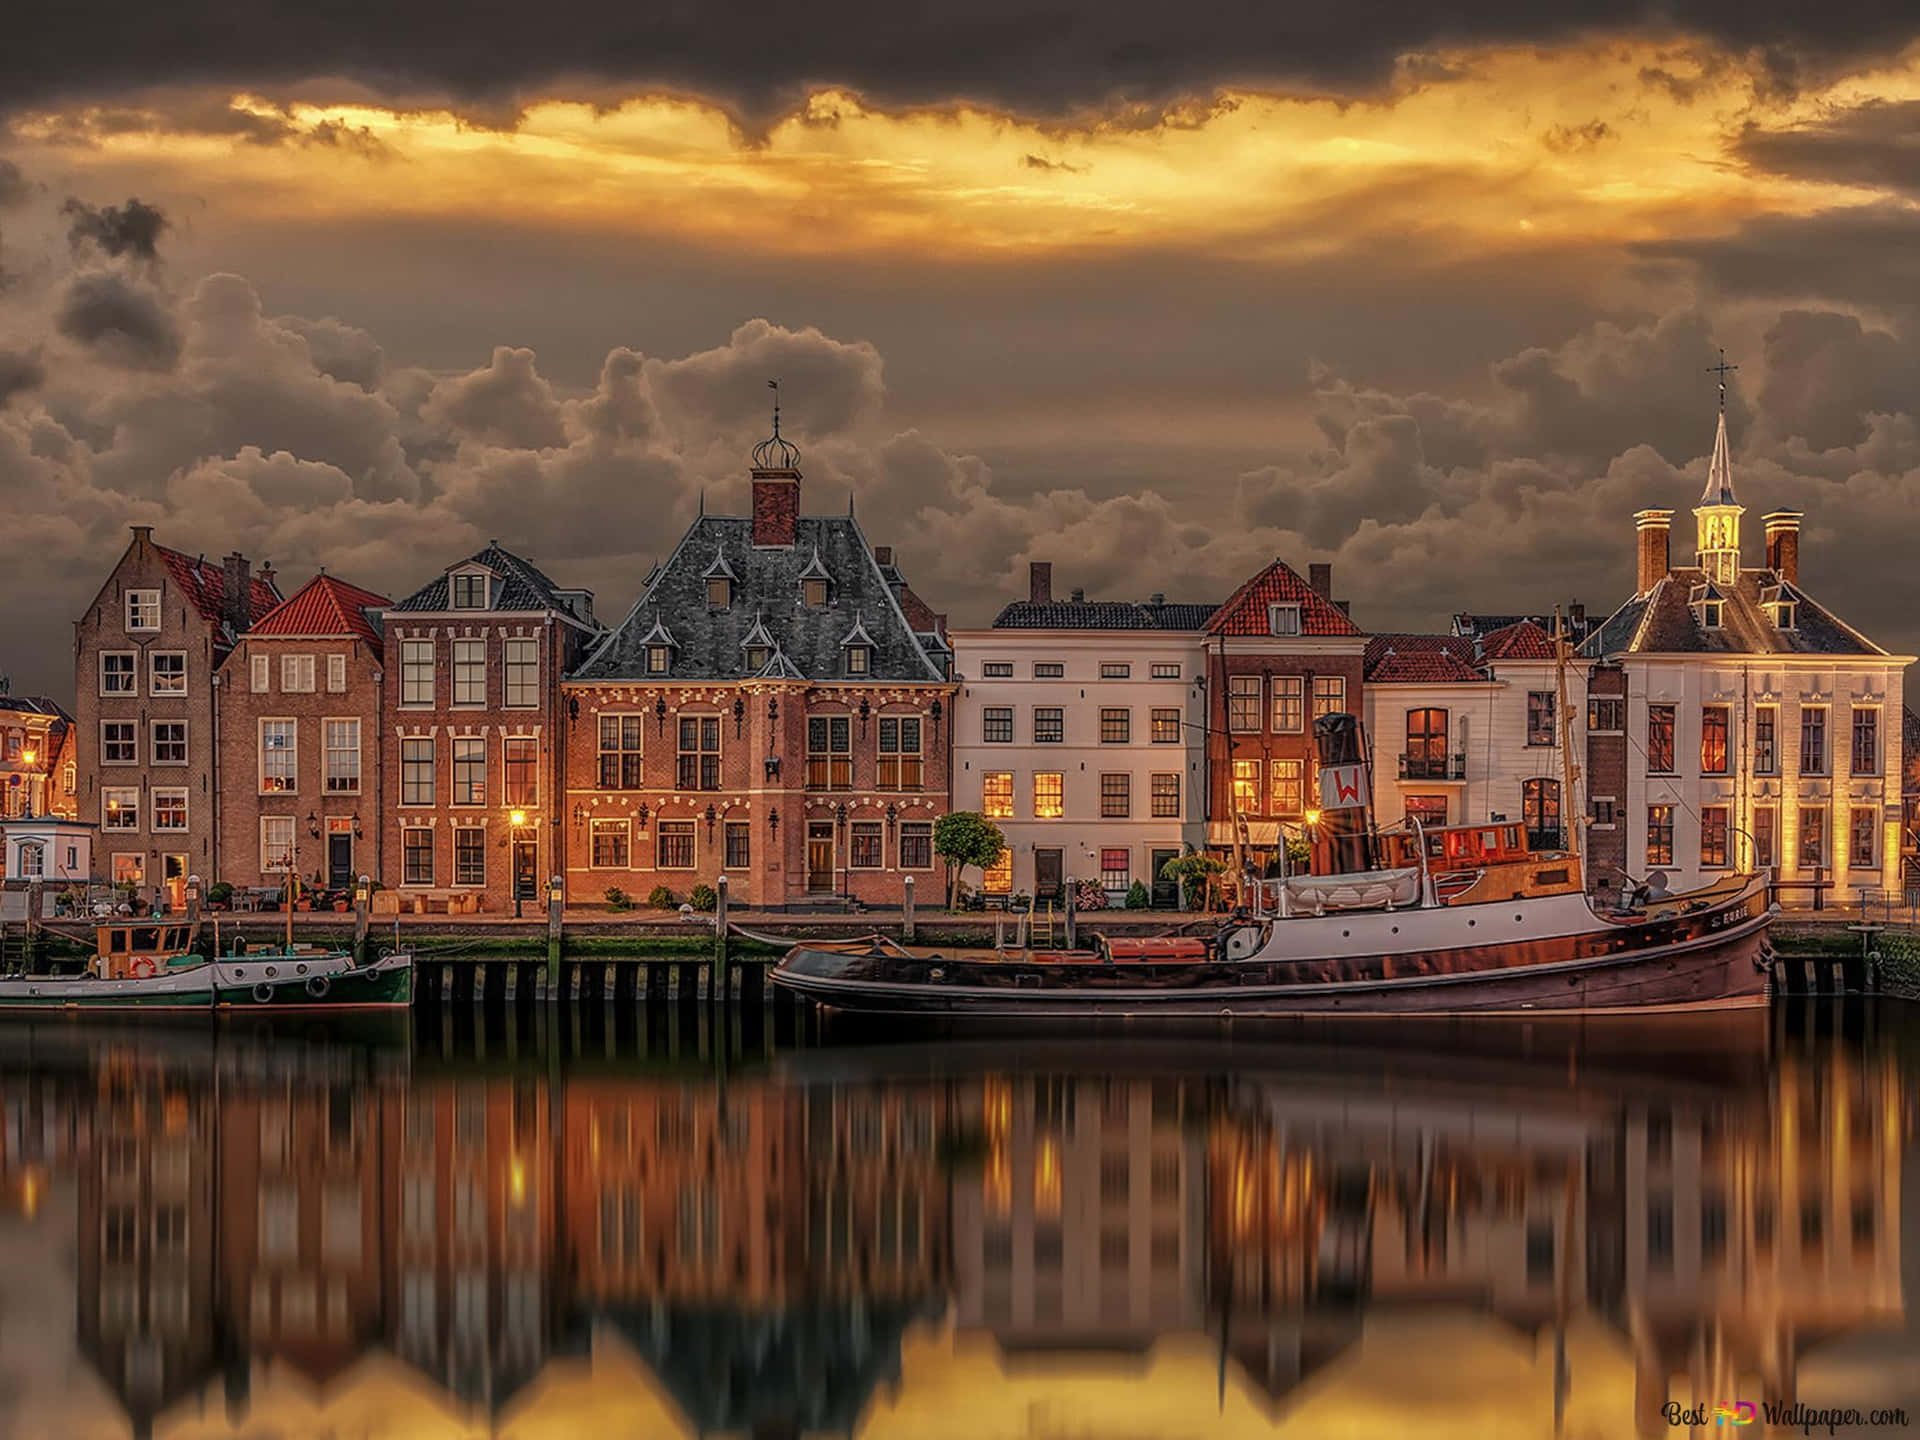 Sunset Glow Over Hengelo Canal Houses Wallpaper